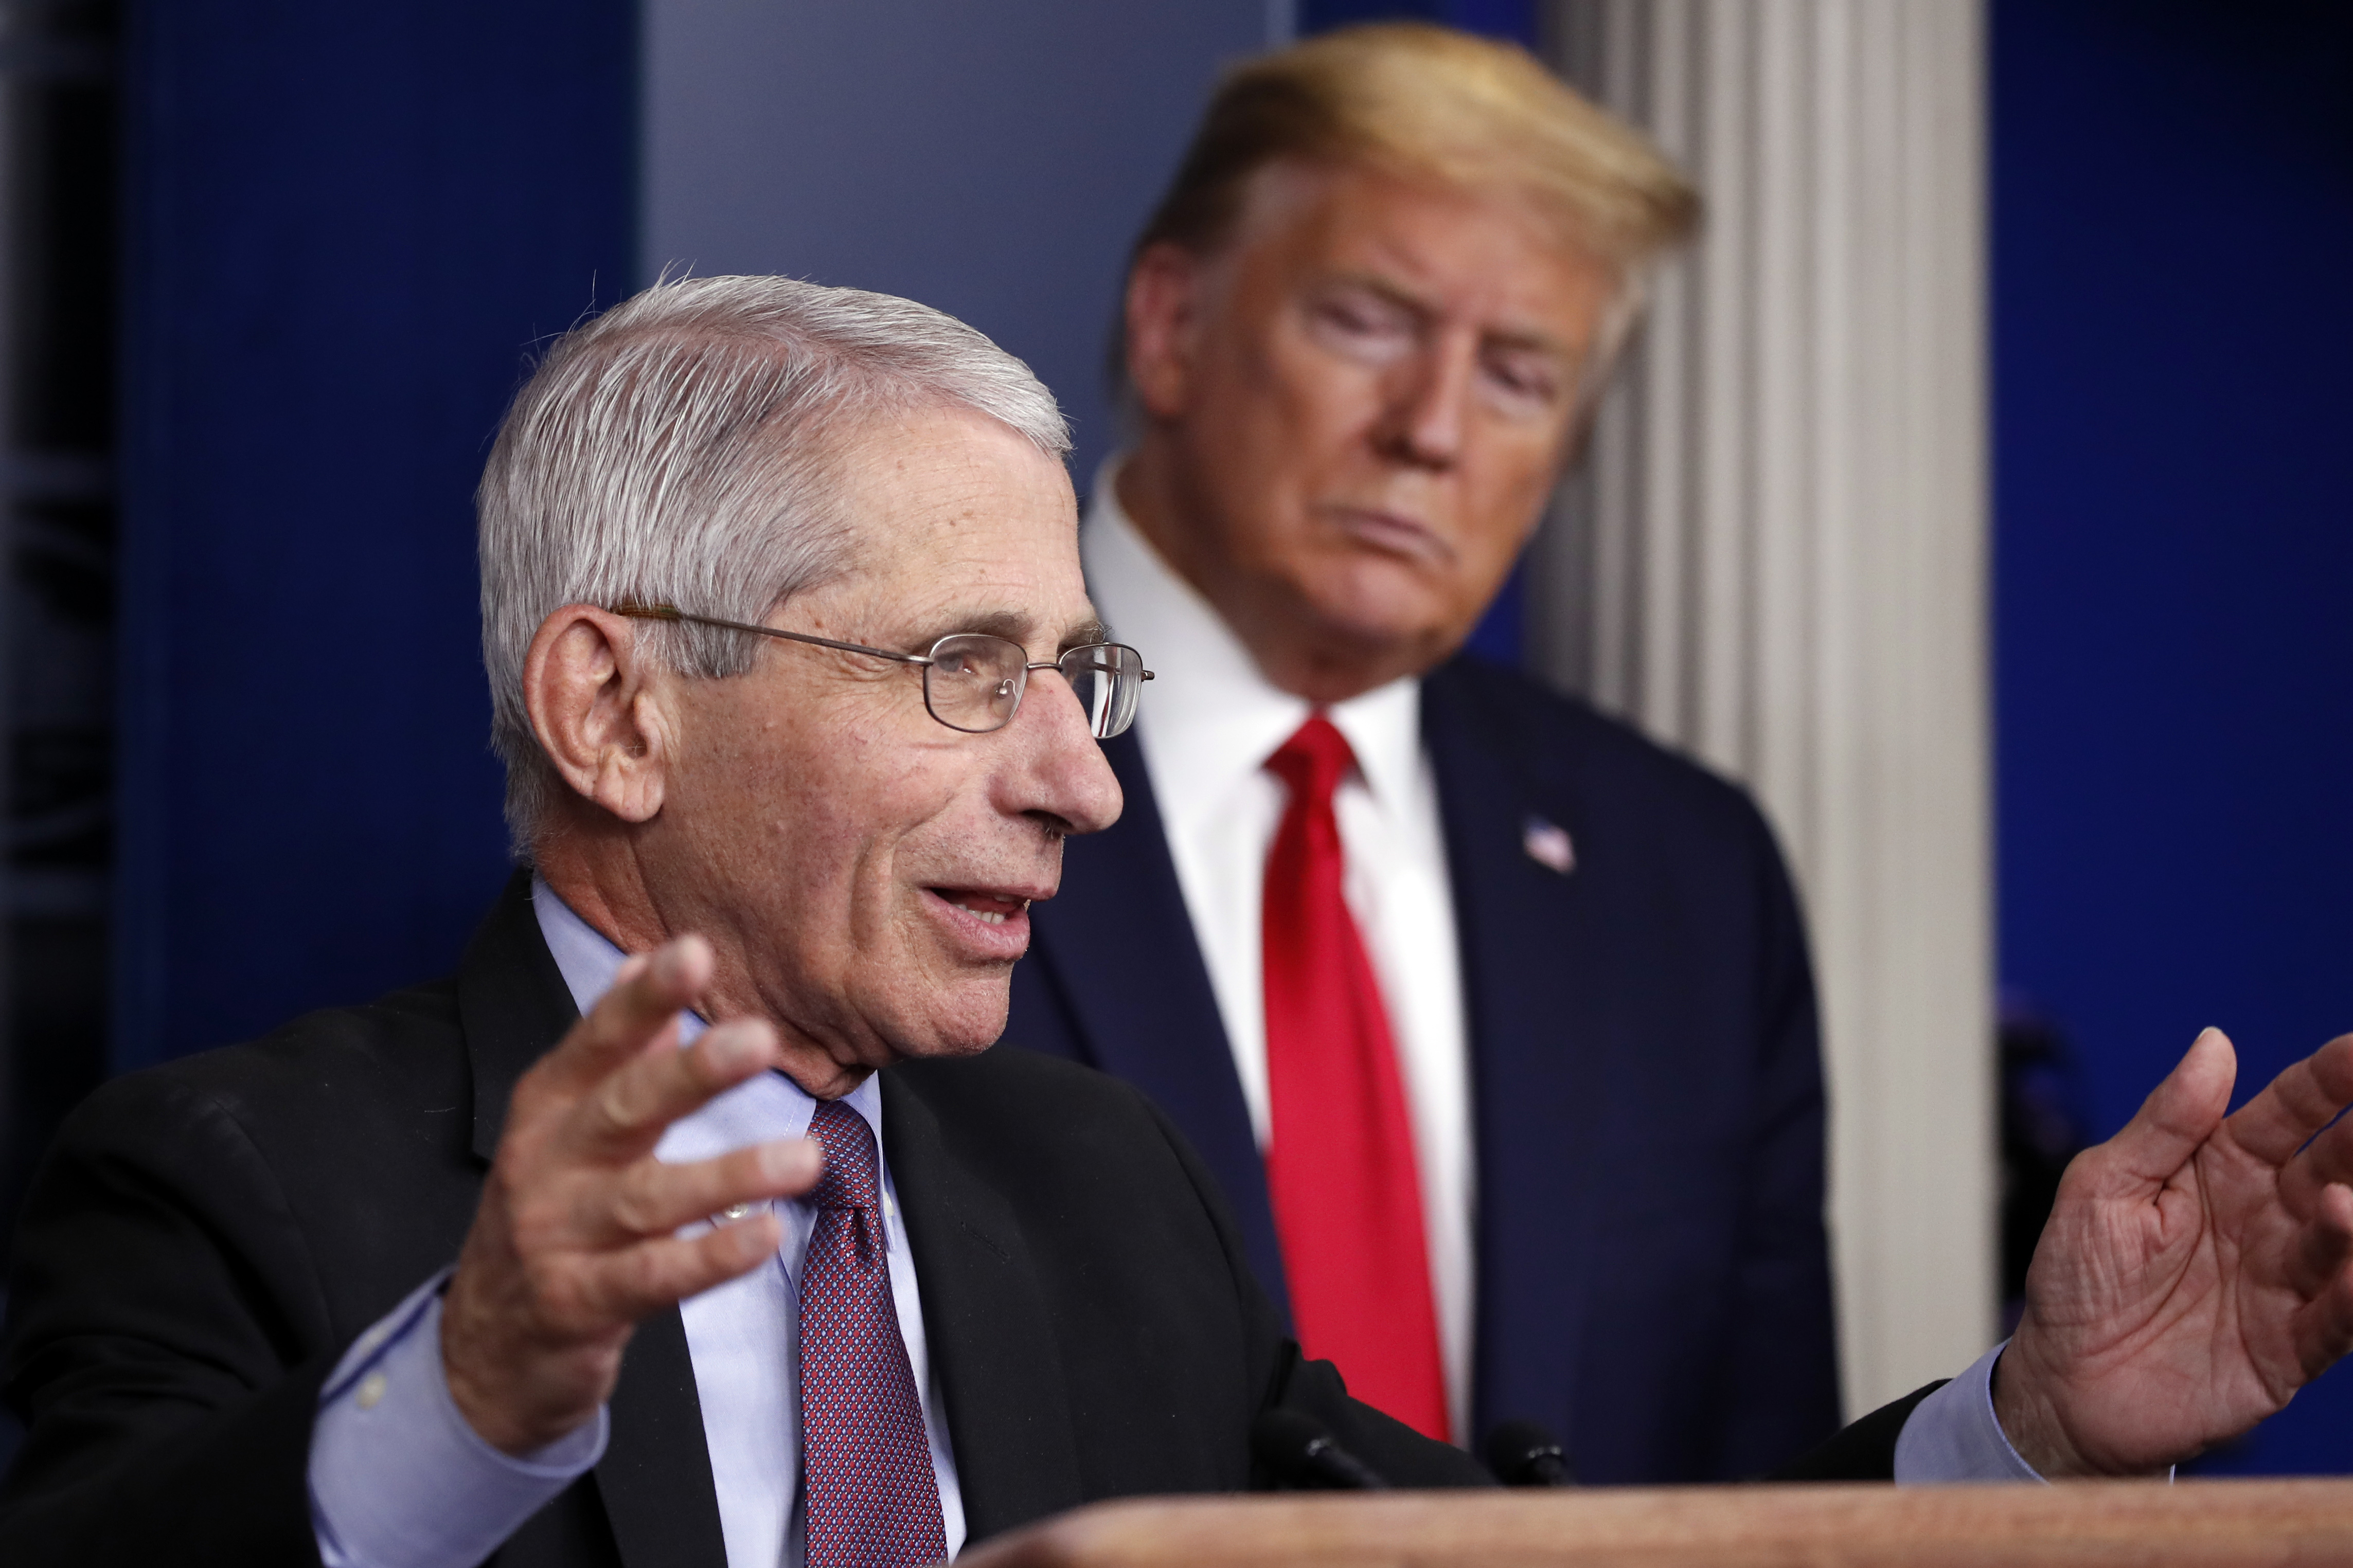 President Donald Trump listens as Dr. Anthony Fauci, the nation's top infectious disease expert, speaks during a briefing about the coronavirus at the White House on April 22.